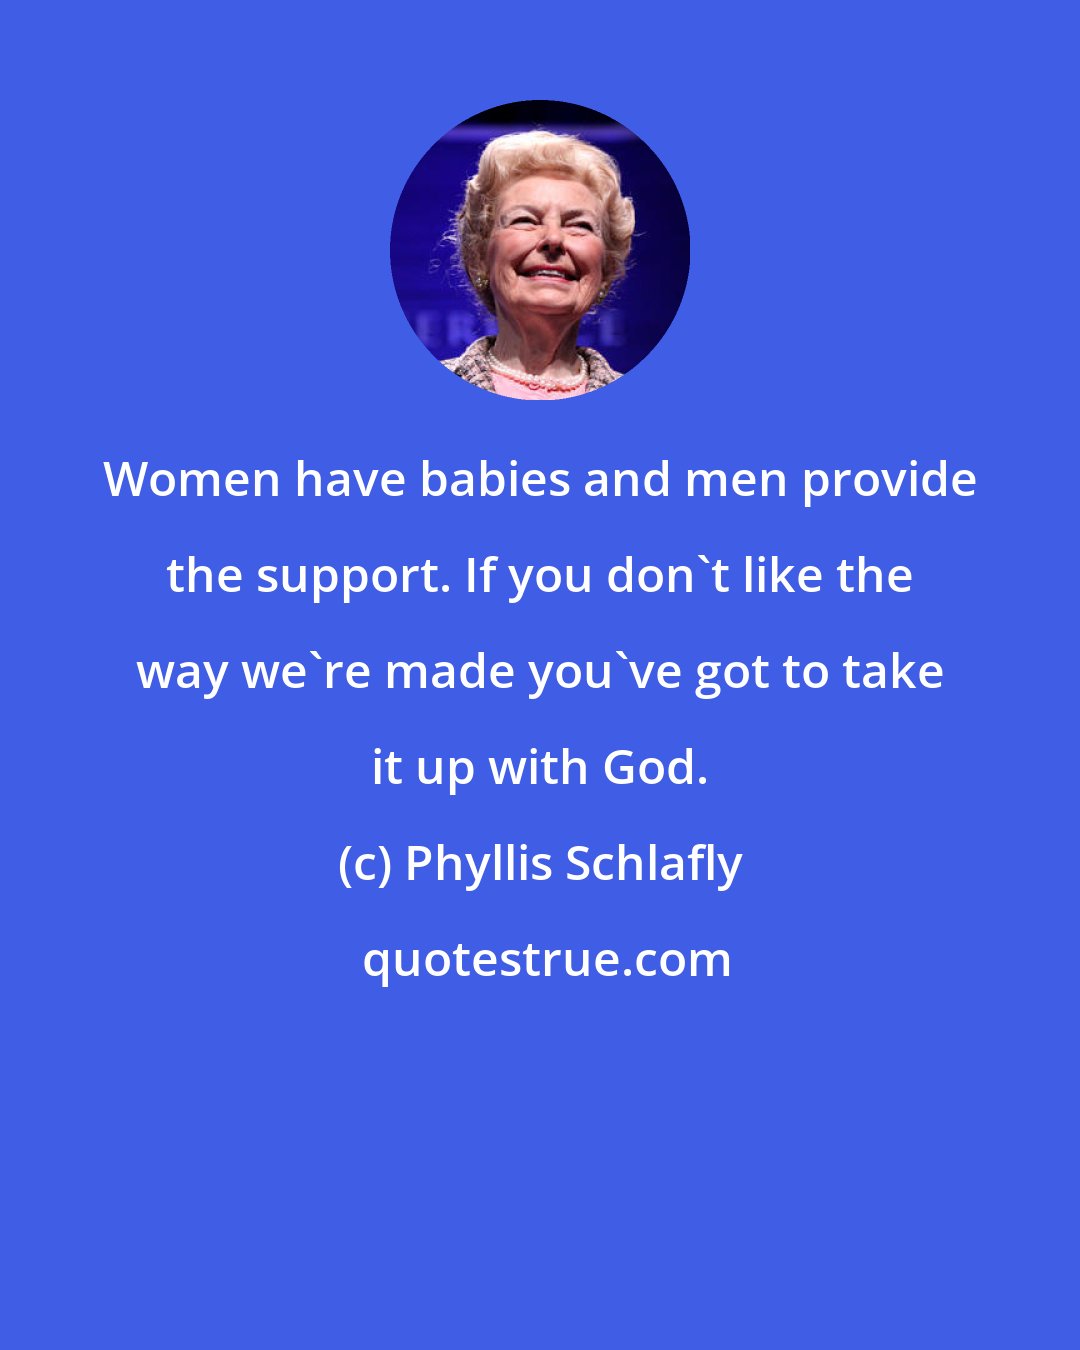 Phyllis Schlafly: Women have babies and men provide the support. If you don't like the way we're made you've got to take it up with God.